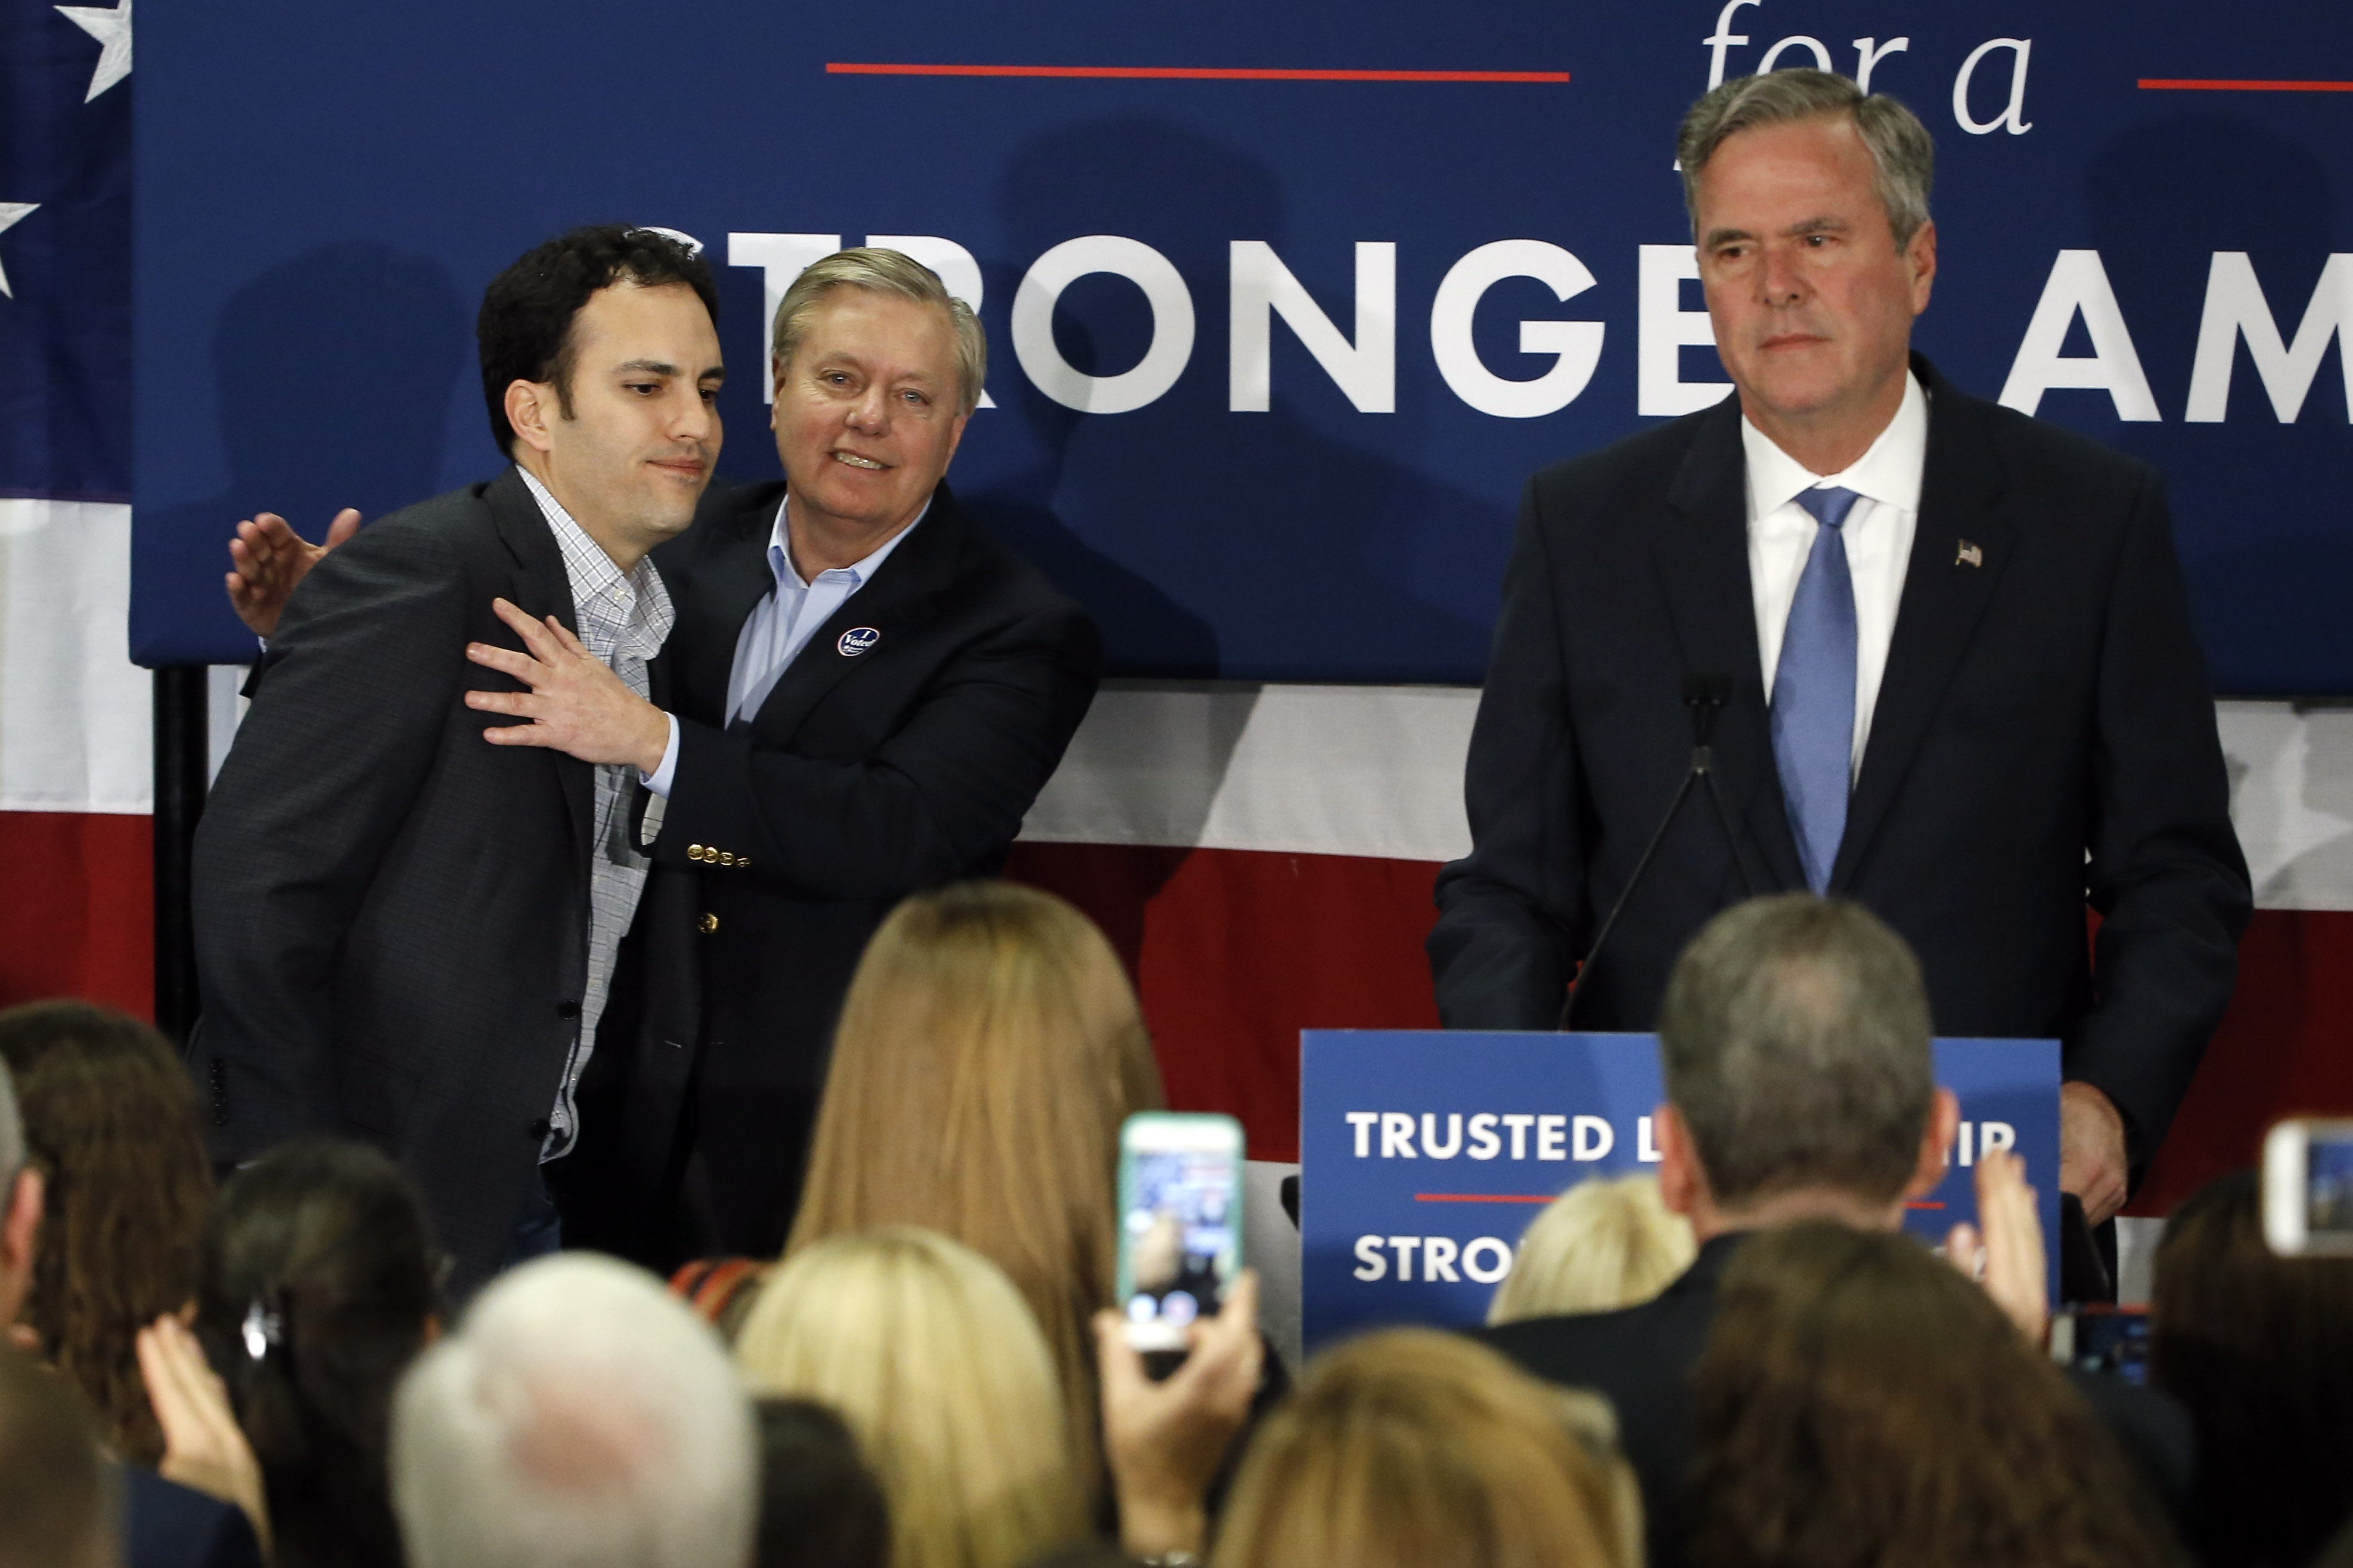 Republican presidential candidate, former Florida Gov. Jeb Bush, right, is accompanied by his son, Jeb Bush Jr., left, and Sen. Lindsey Graham, R-S.C., as he speaks at his South Carolina Republican presidential primary rally in Columbia, S.C., Saturday, Feb. 20, 2016. (AP Photo/Matt Rourke)